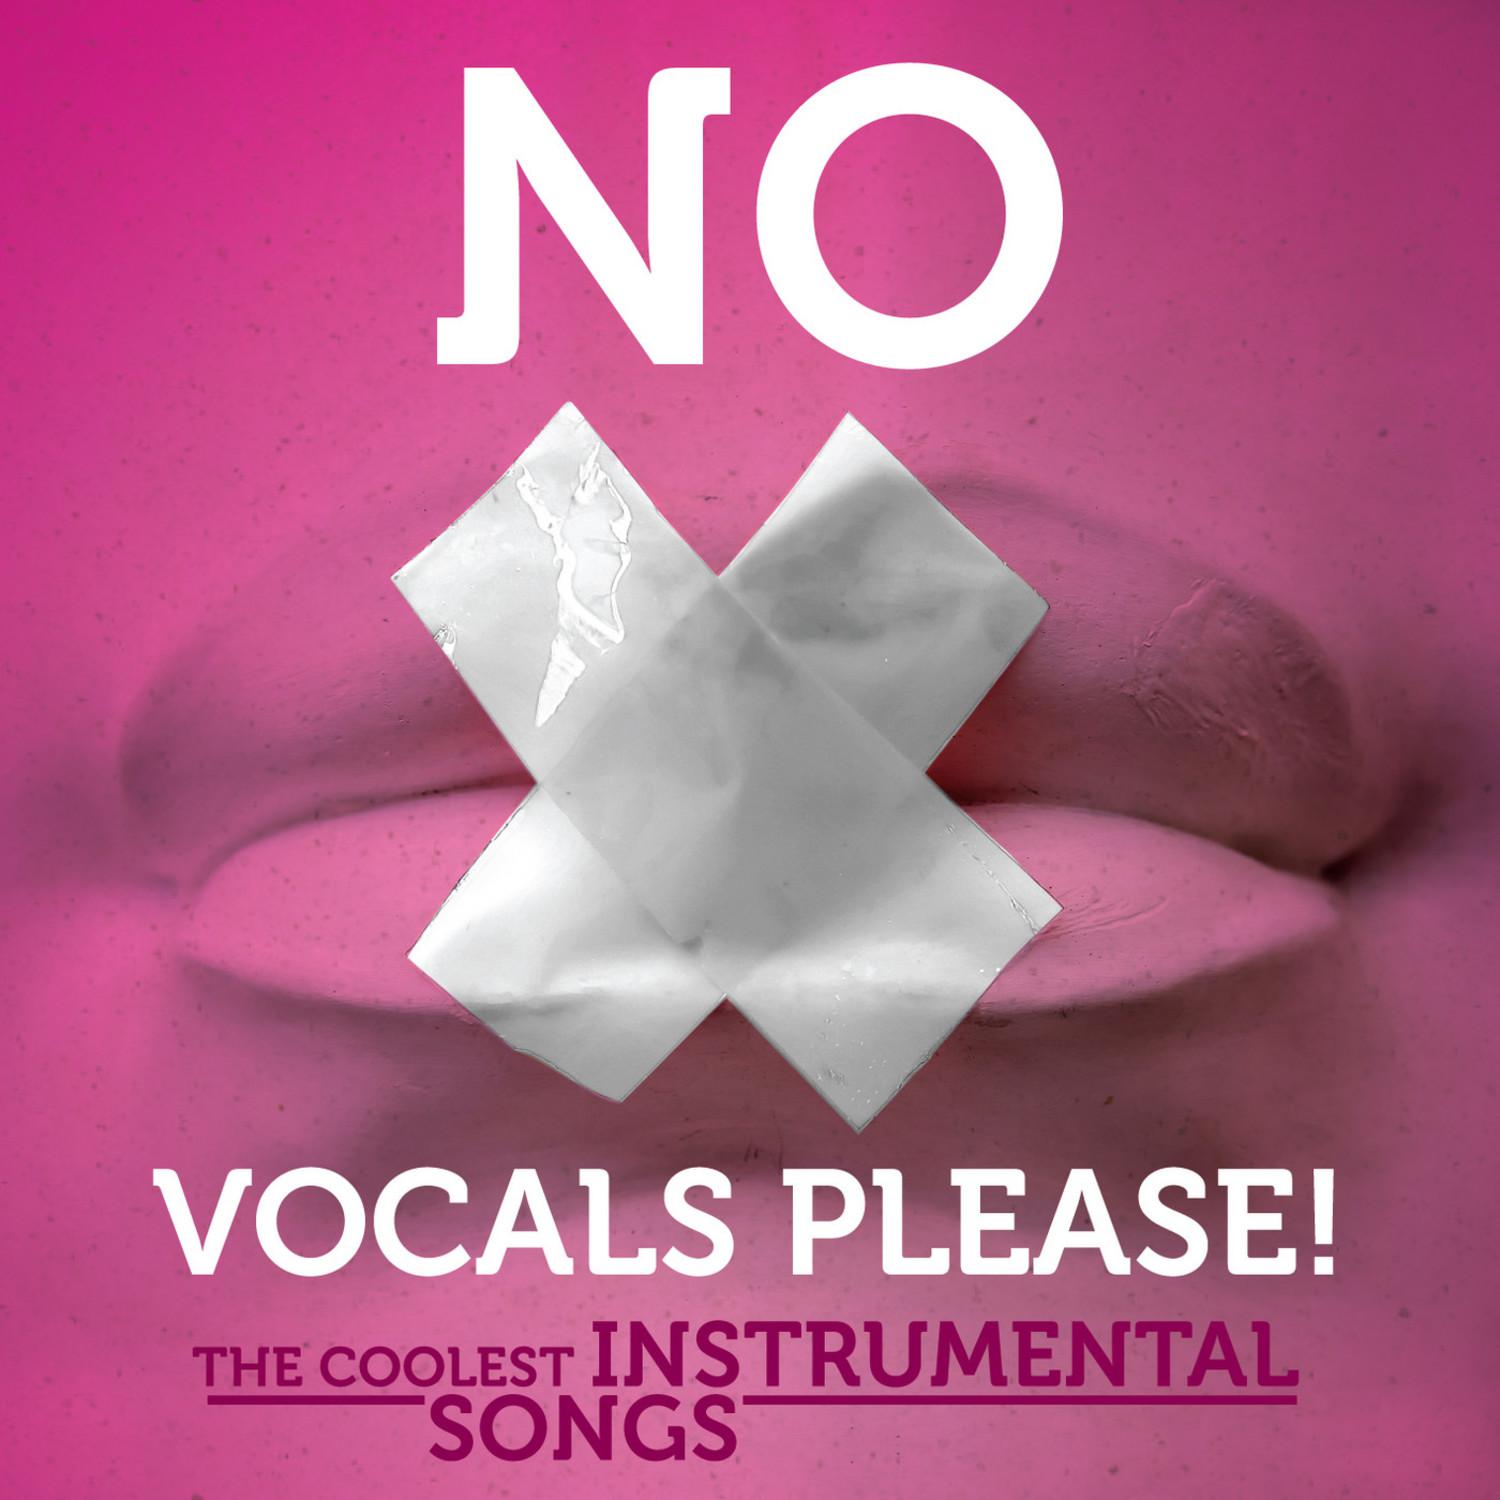 No Vocals Please! - The Coolest Instrumental Songs